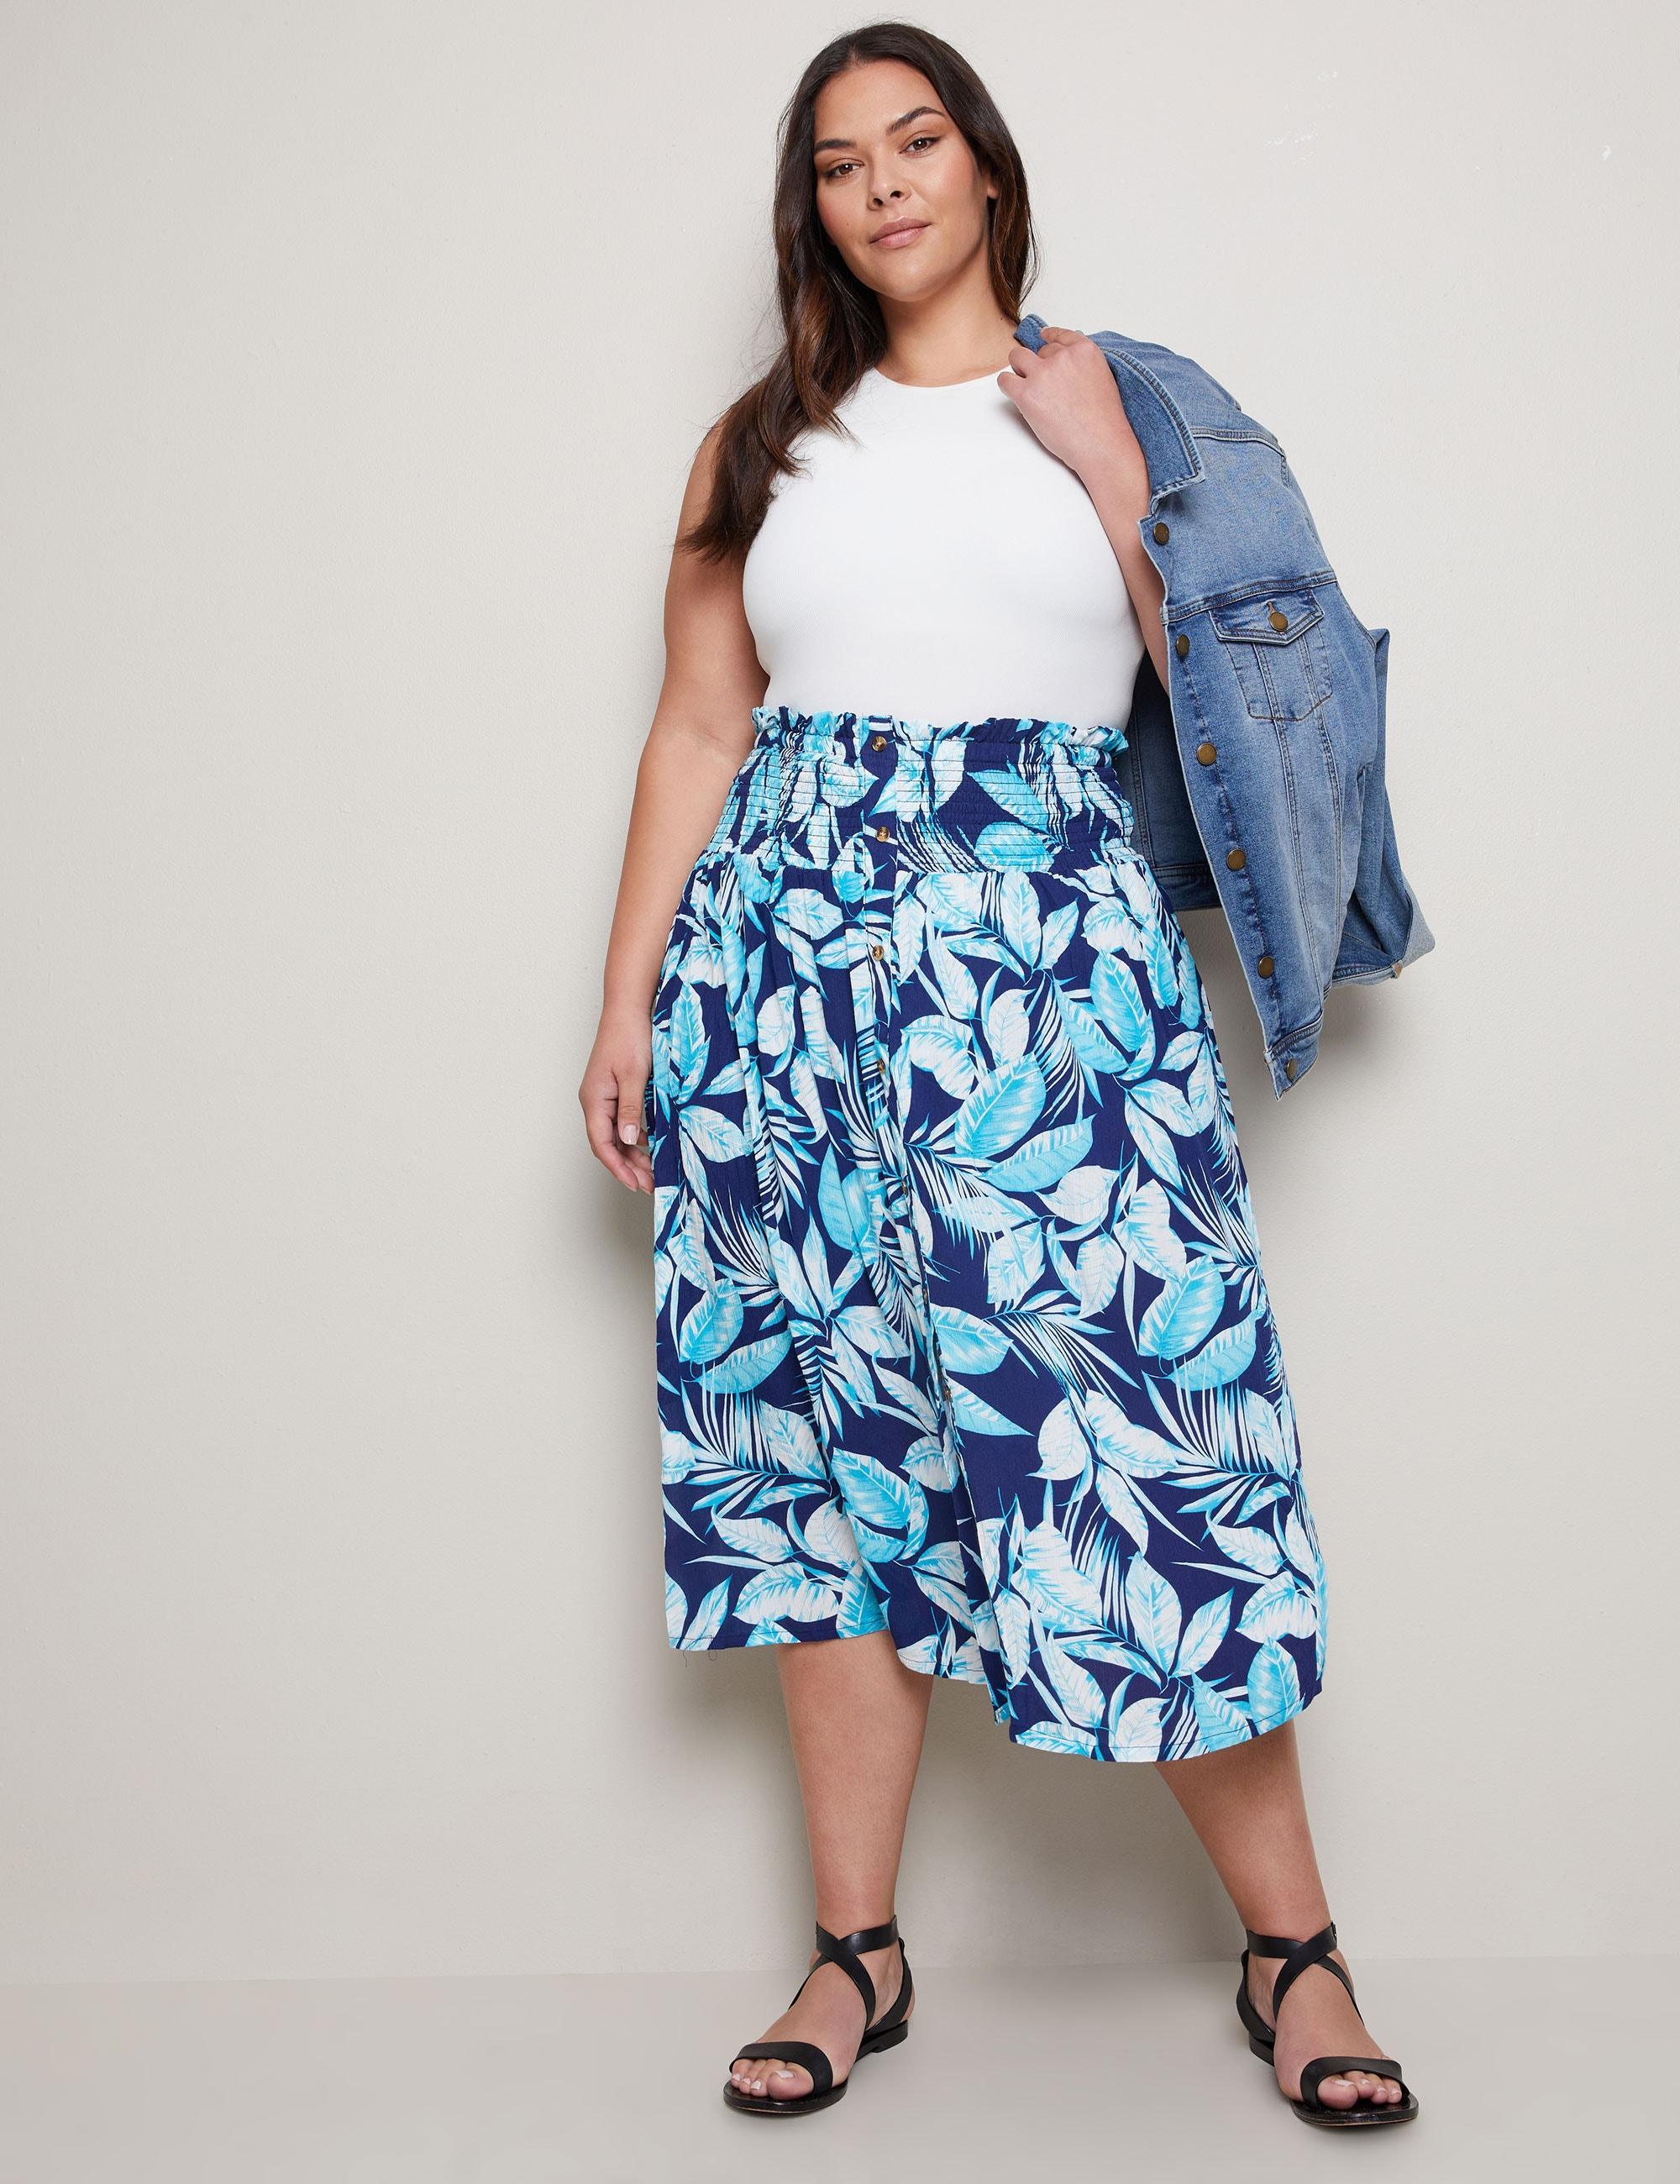 AUTOGRAPH - Plus Size - Womens Skirts - Midi - Summer - Blue - Floral - A Line - Relaxed Fit - Woven - Smocked Waist - Knee Length - Work Fashion